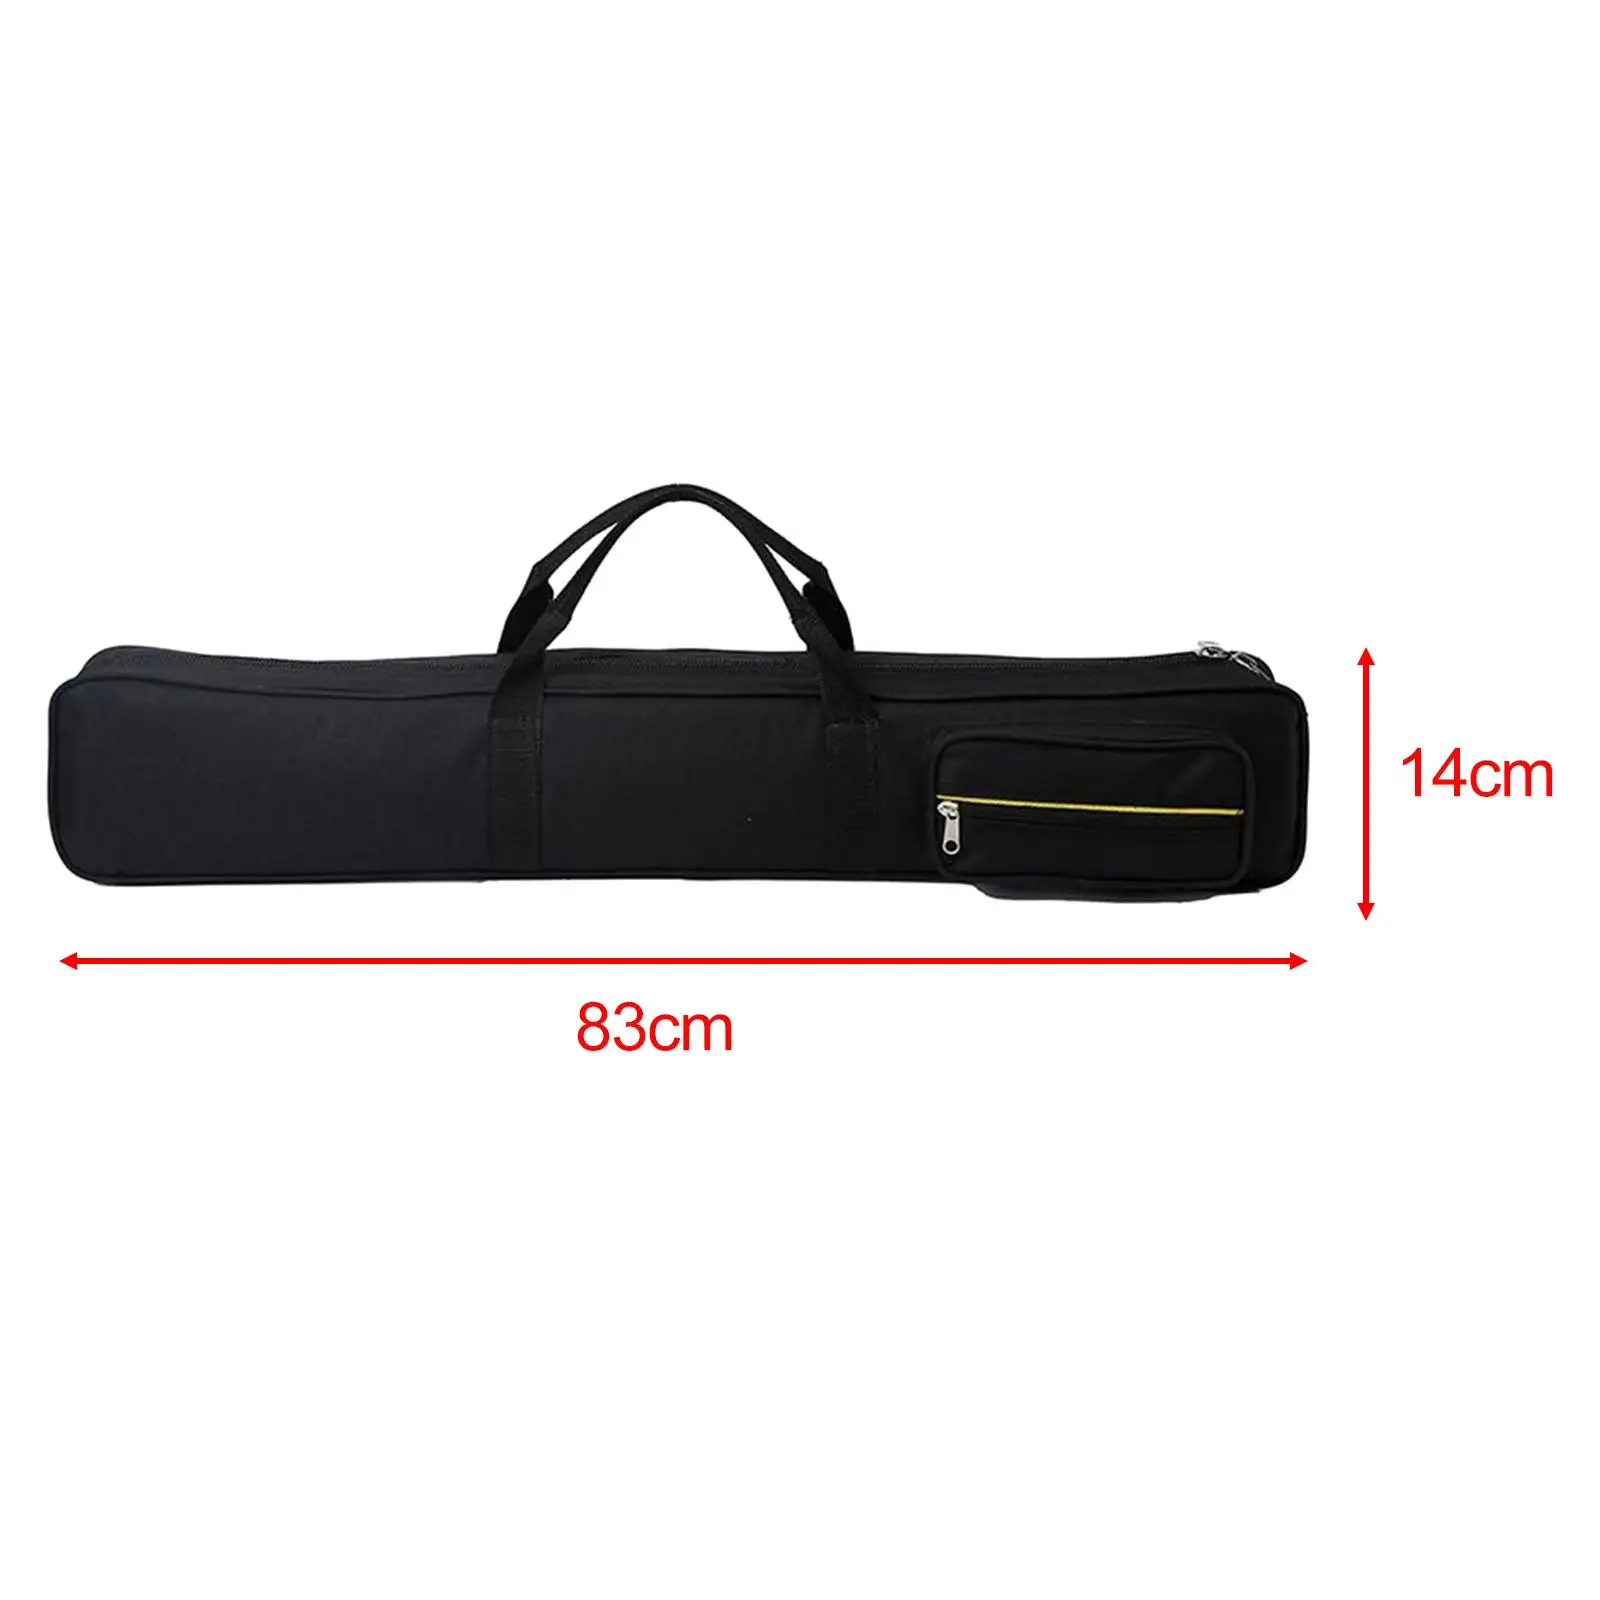 Billiards Pool Cue Case with Divider Lightweight Pool Cue Carry Bag 1/2 Jointed